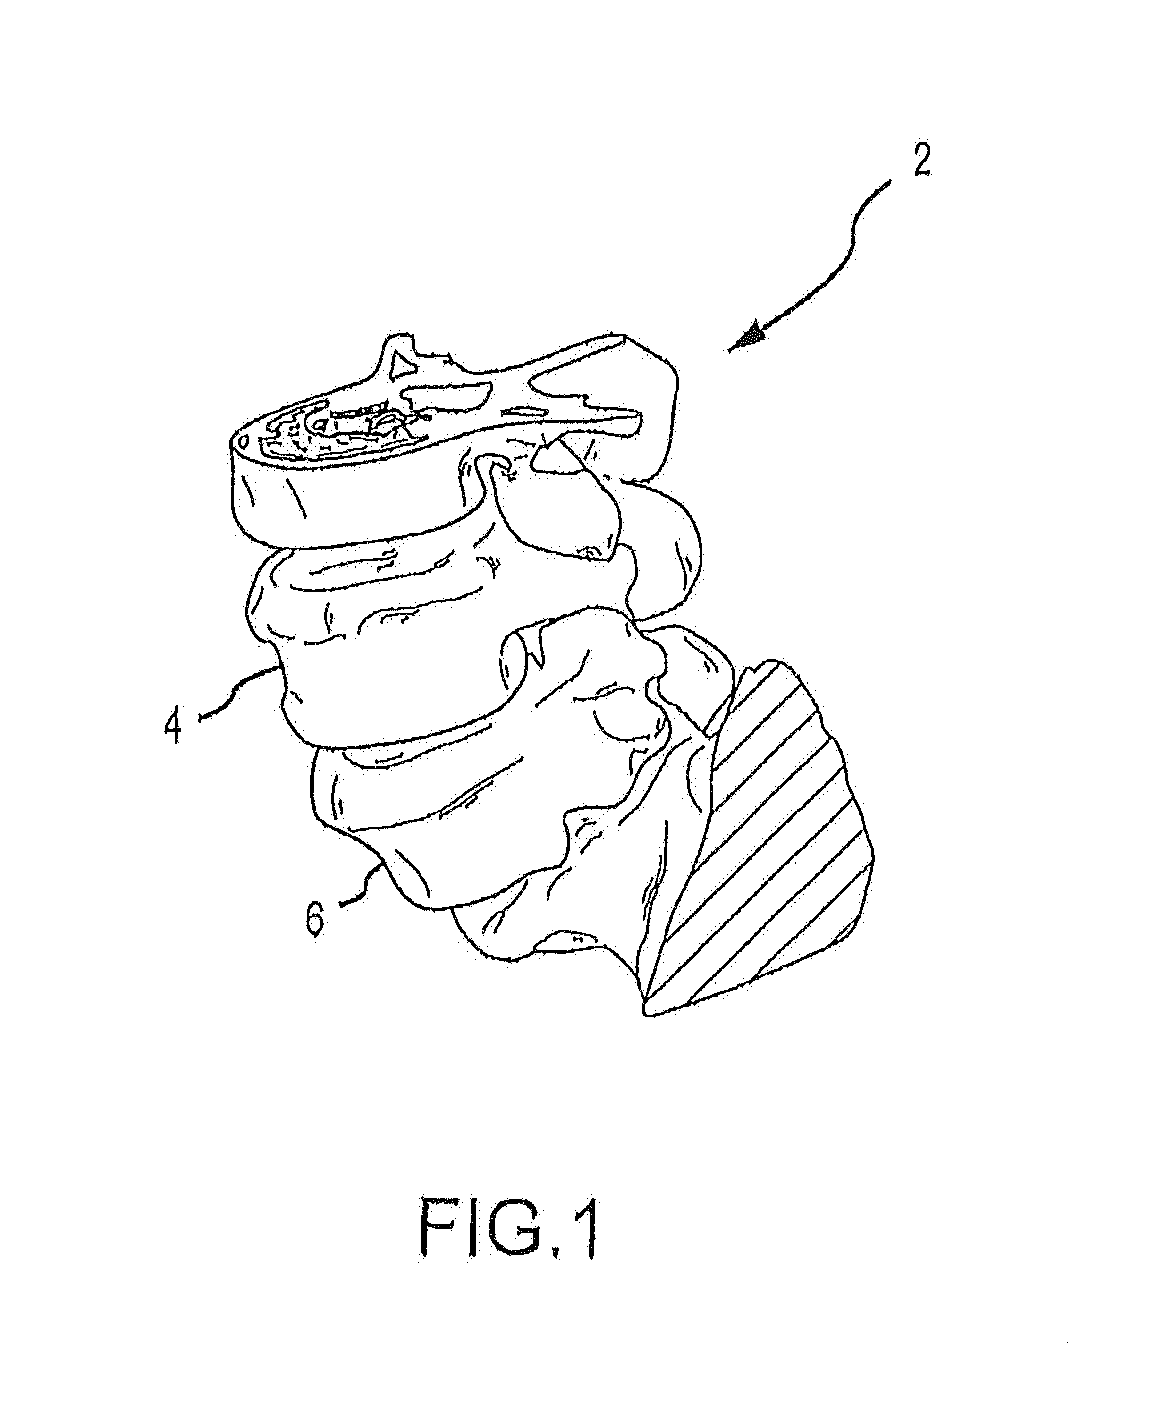 Patient-matched apparatus and methods for performing surgical procedures